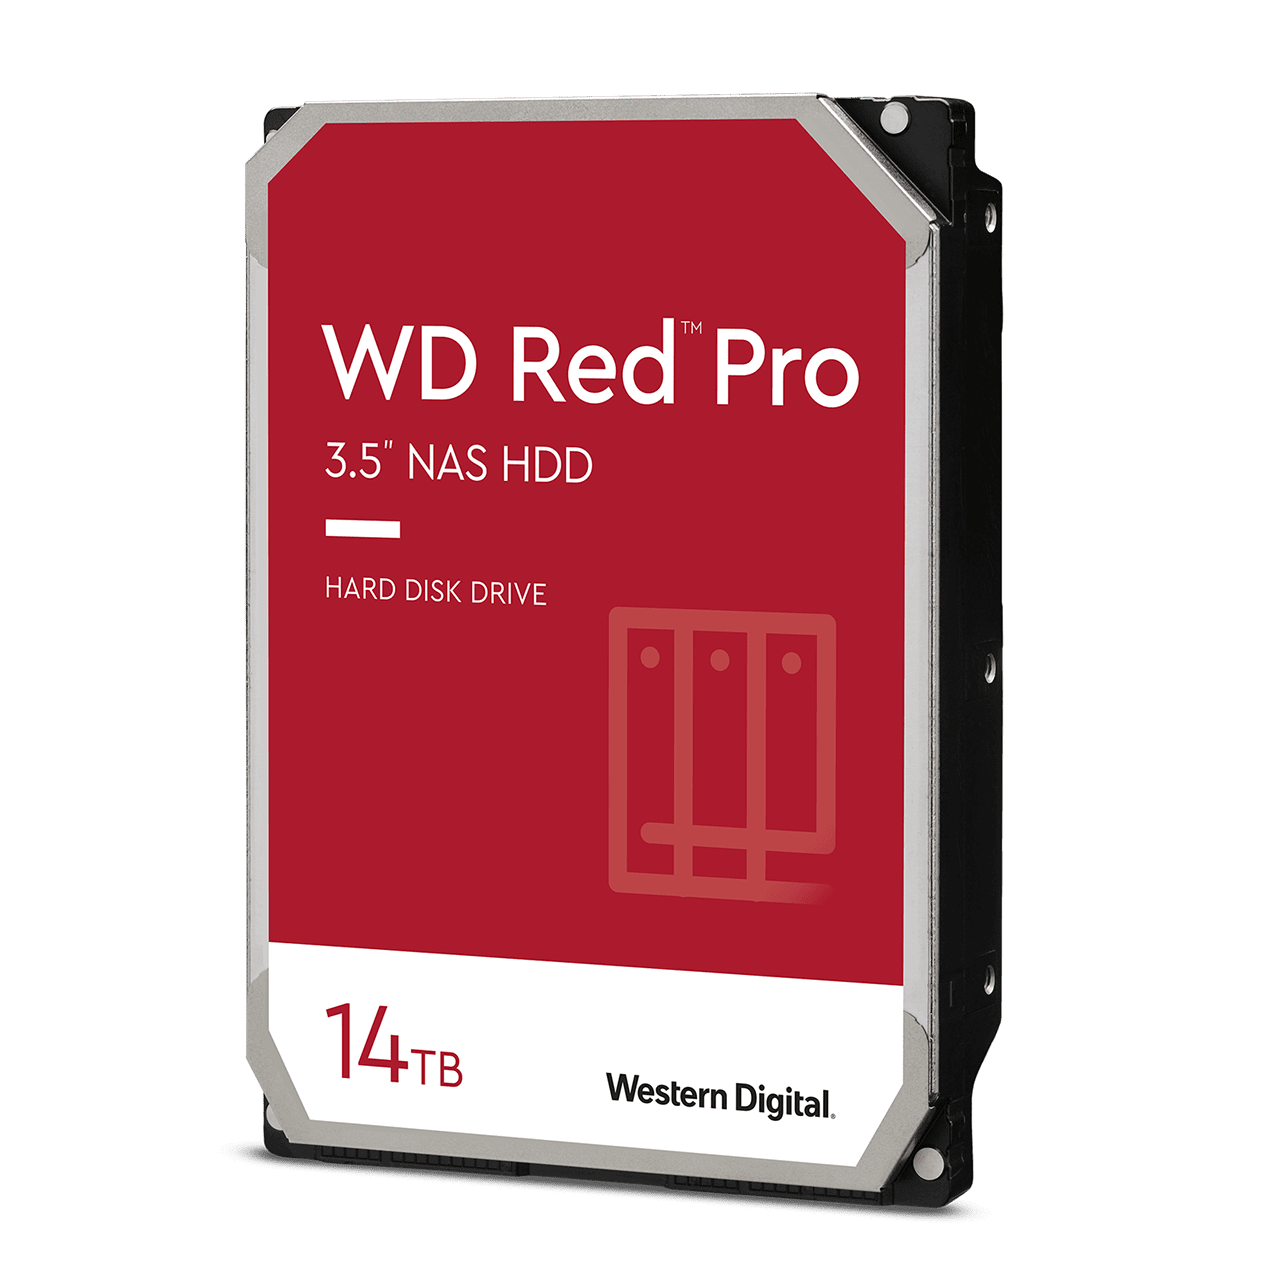 WD Red Pro, Buy 2 14TB drives for $439.98 + Free Ultra SDHC/SDXC Memory Card 128GB